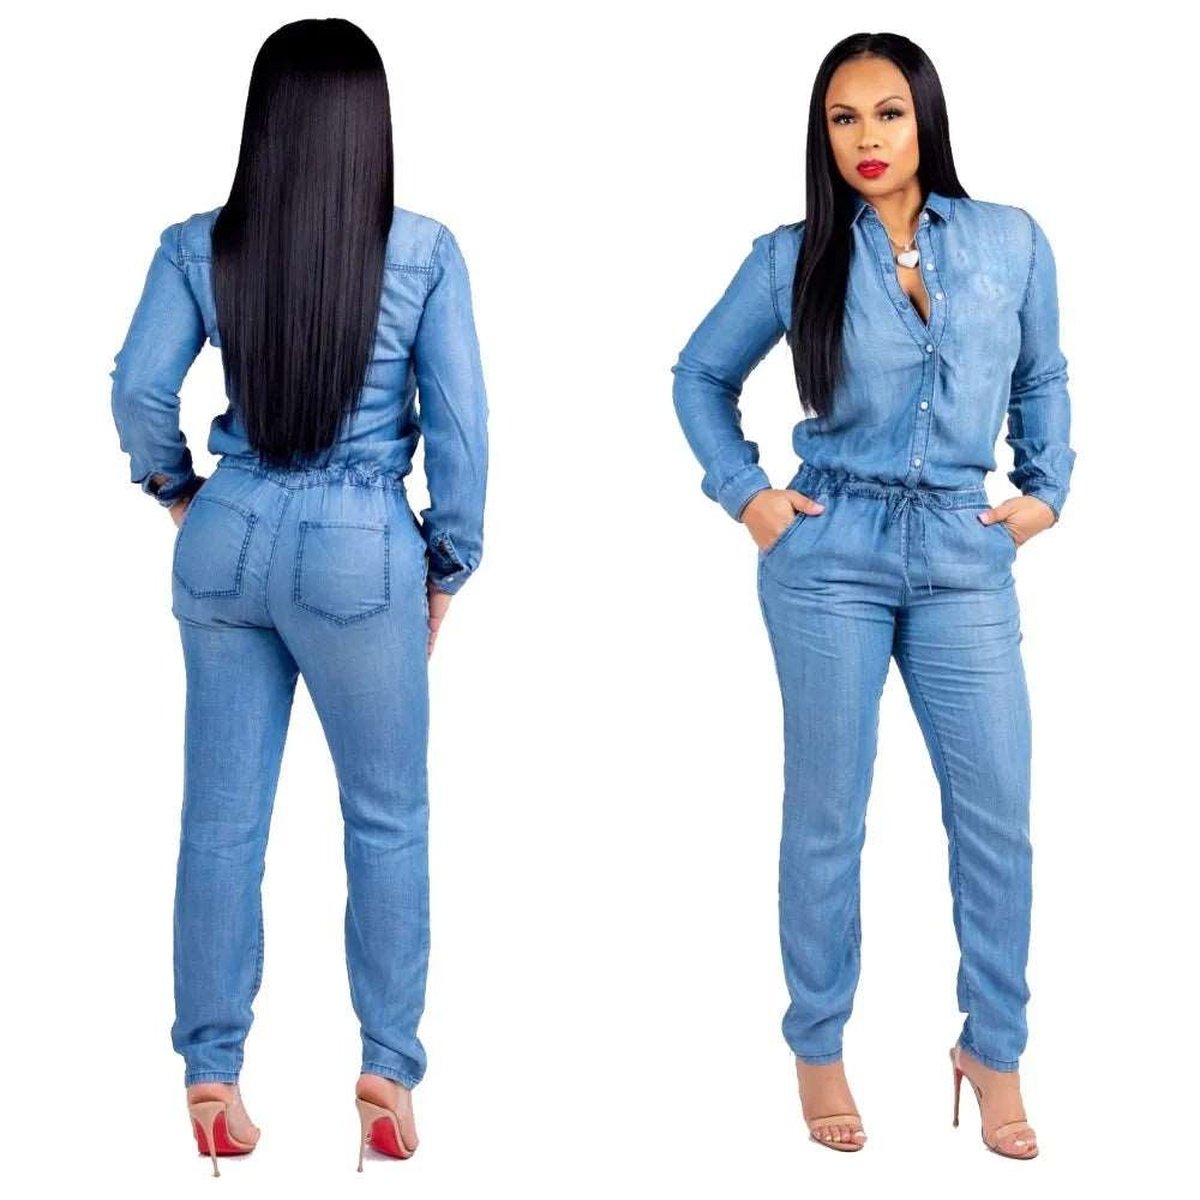 Stunning Collection of Women's Jumpsuits